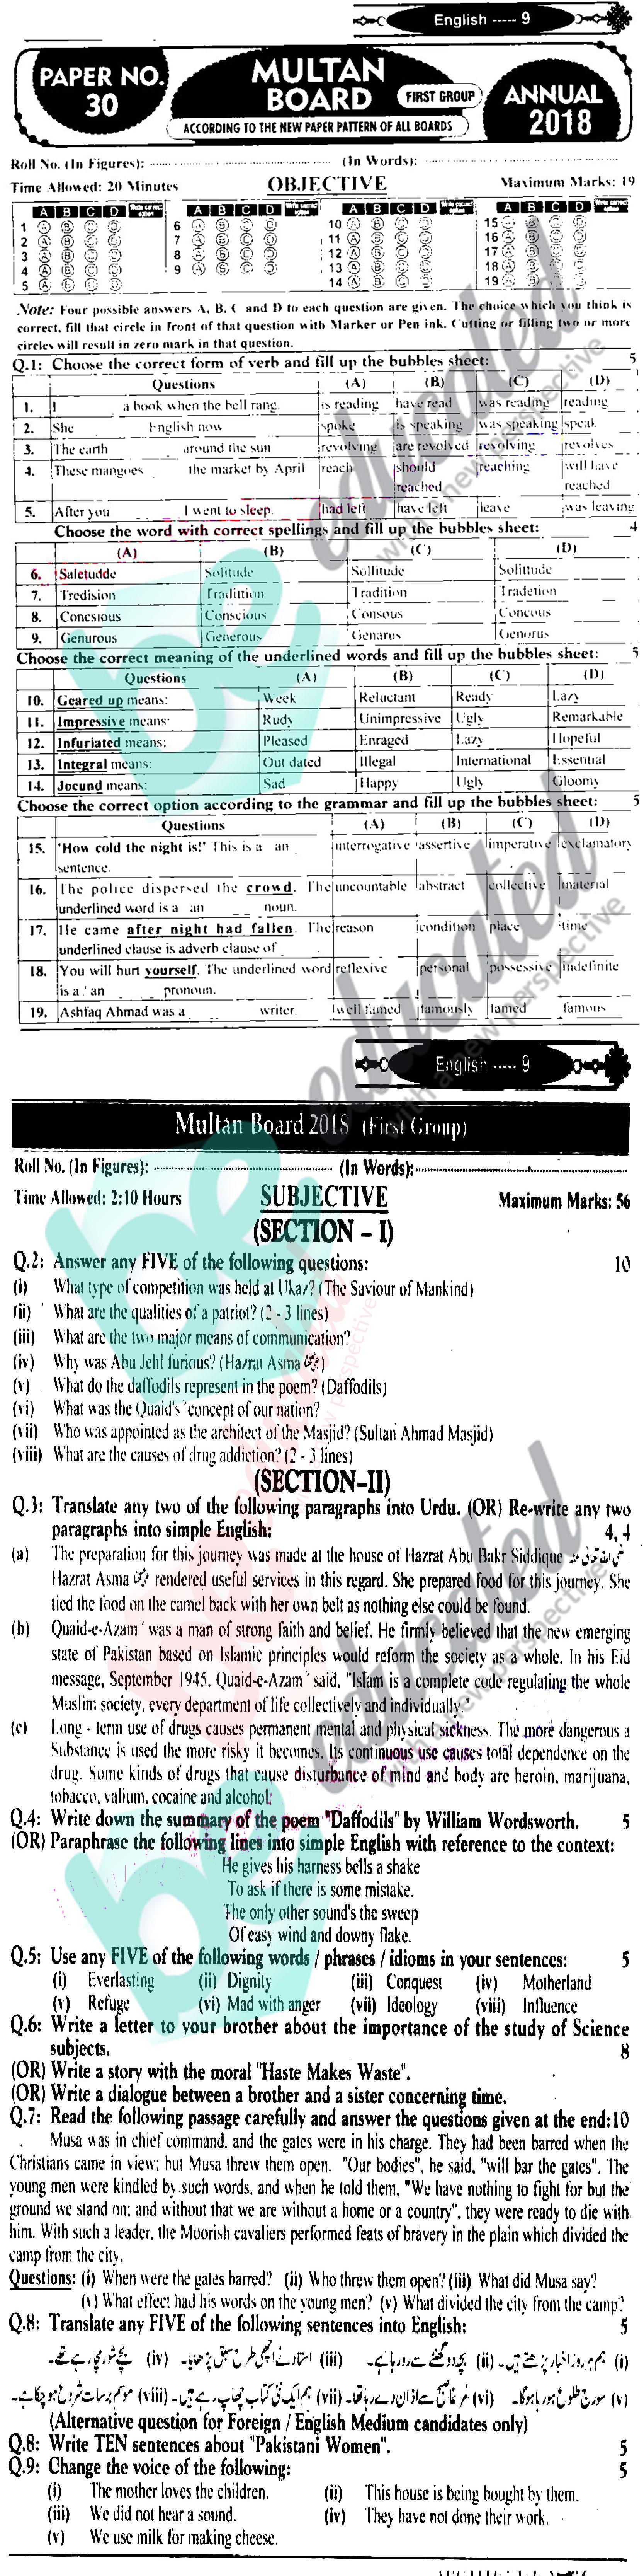 English 9th class Past Paper Group 1 BISE Multan 2018